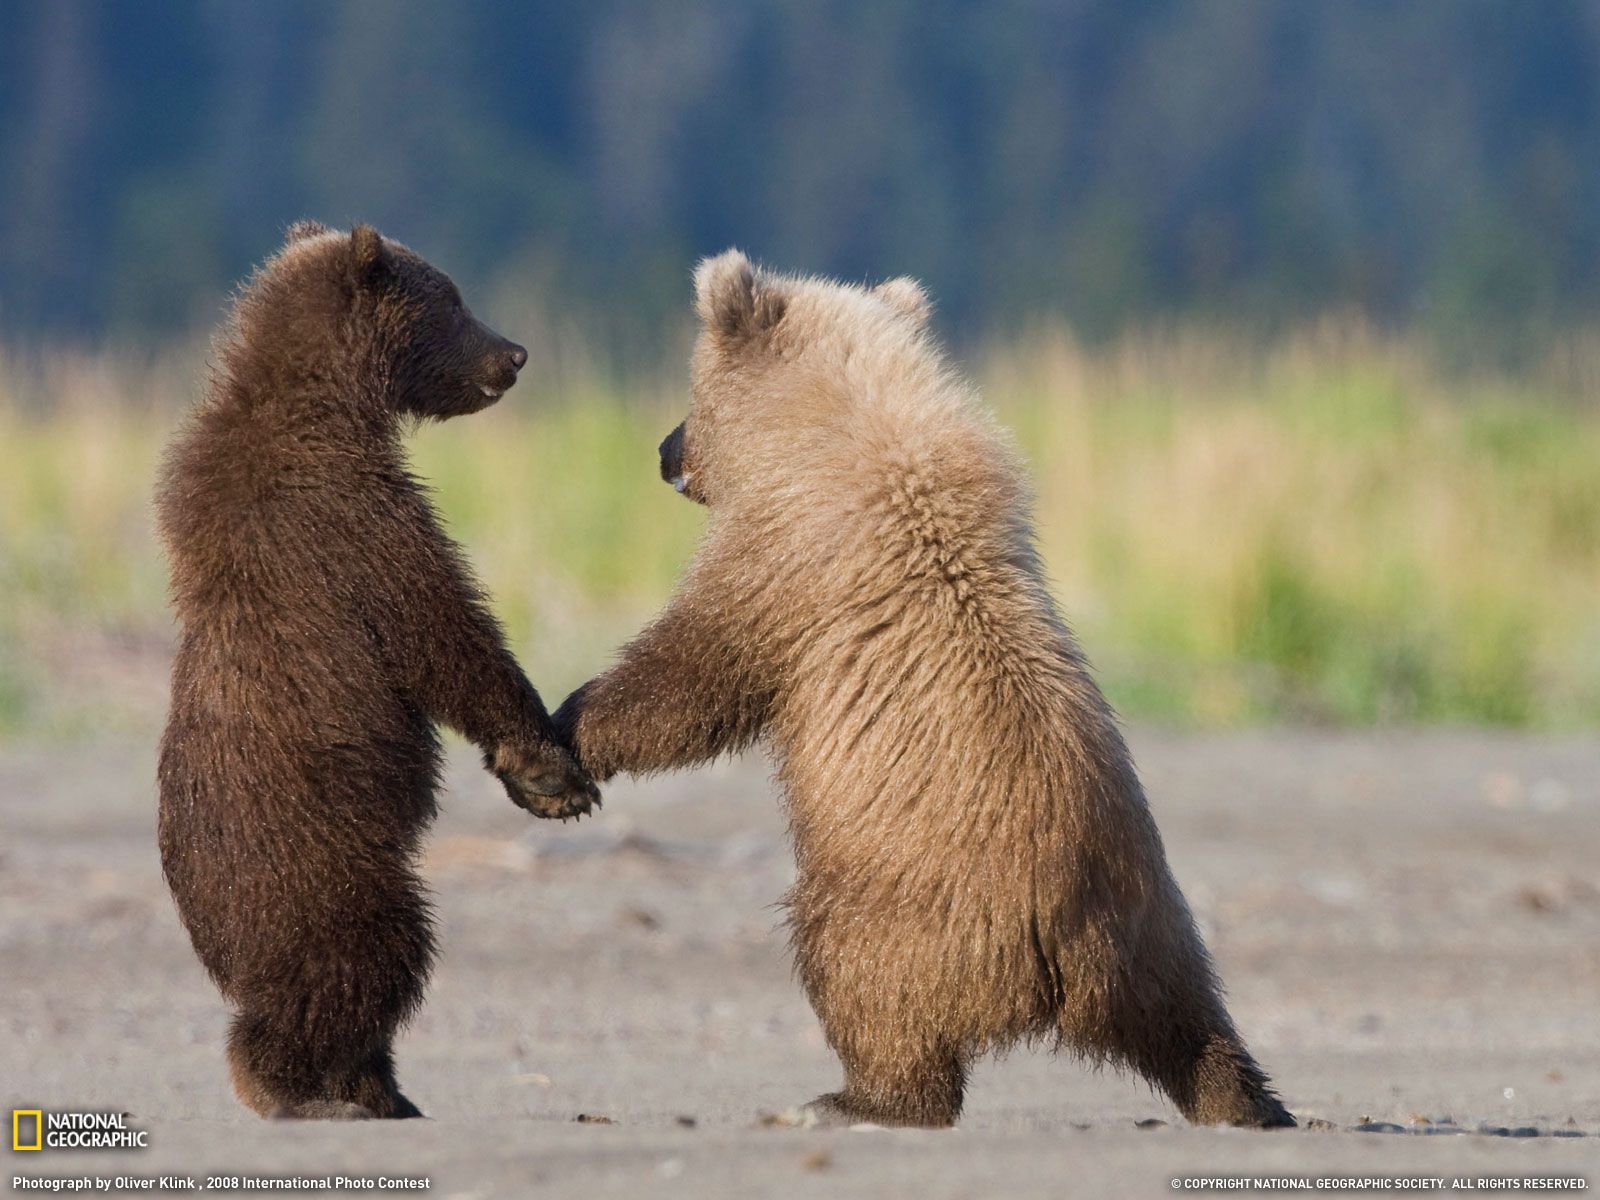 3600_1600x1200 Wallpaper Grizzly Bear Cubs